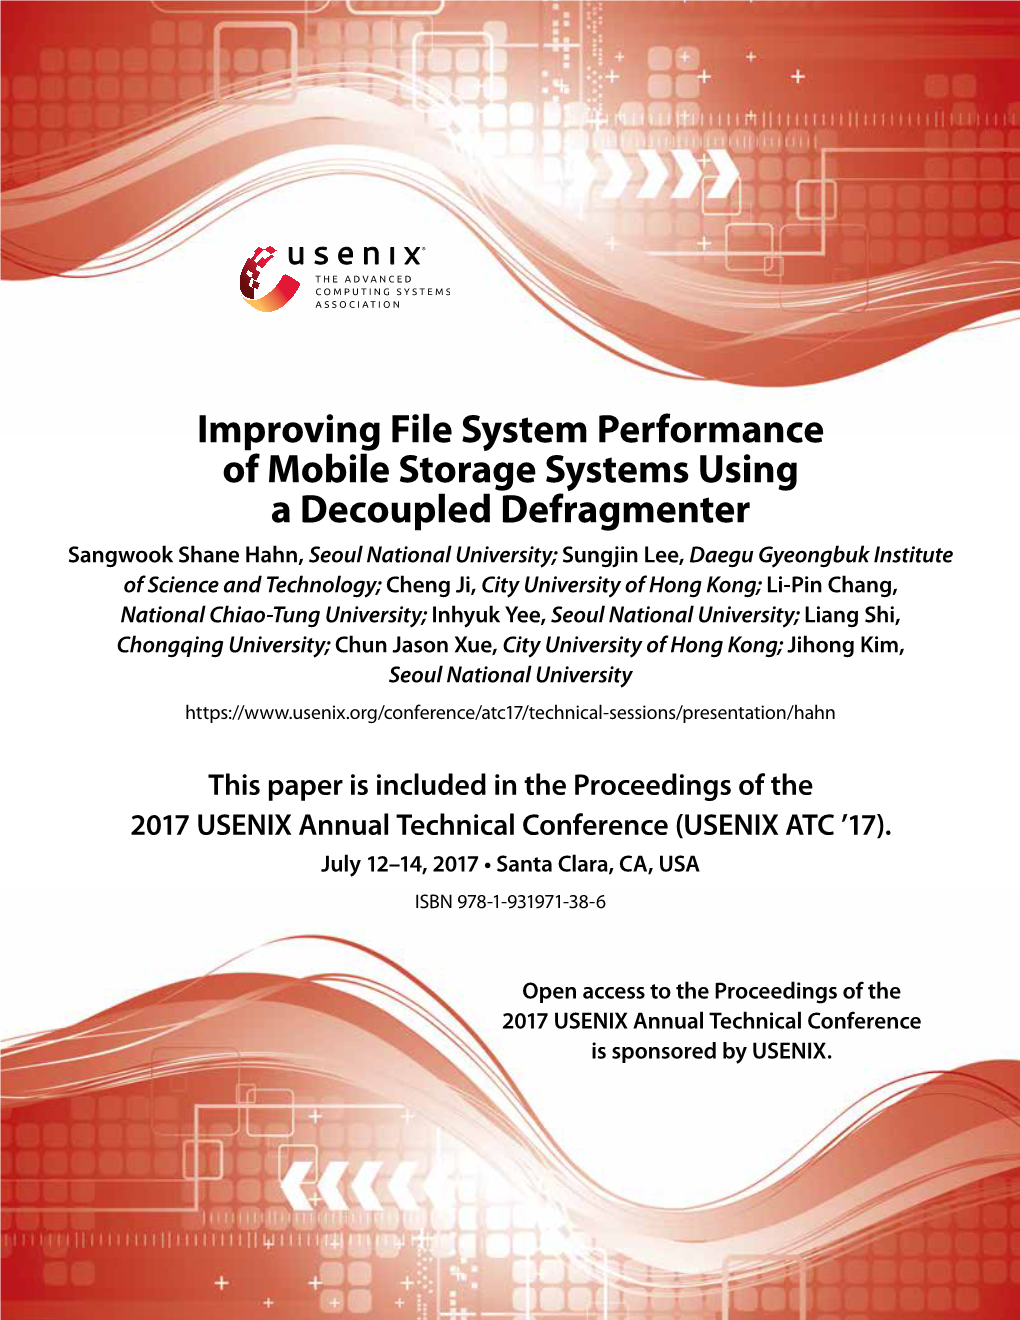 Improving File System Performance of Mobile Storage Systems Using A